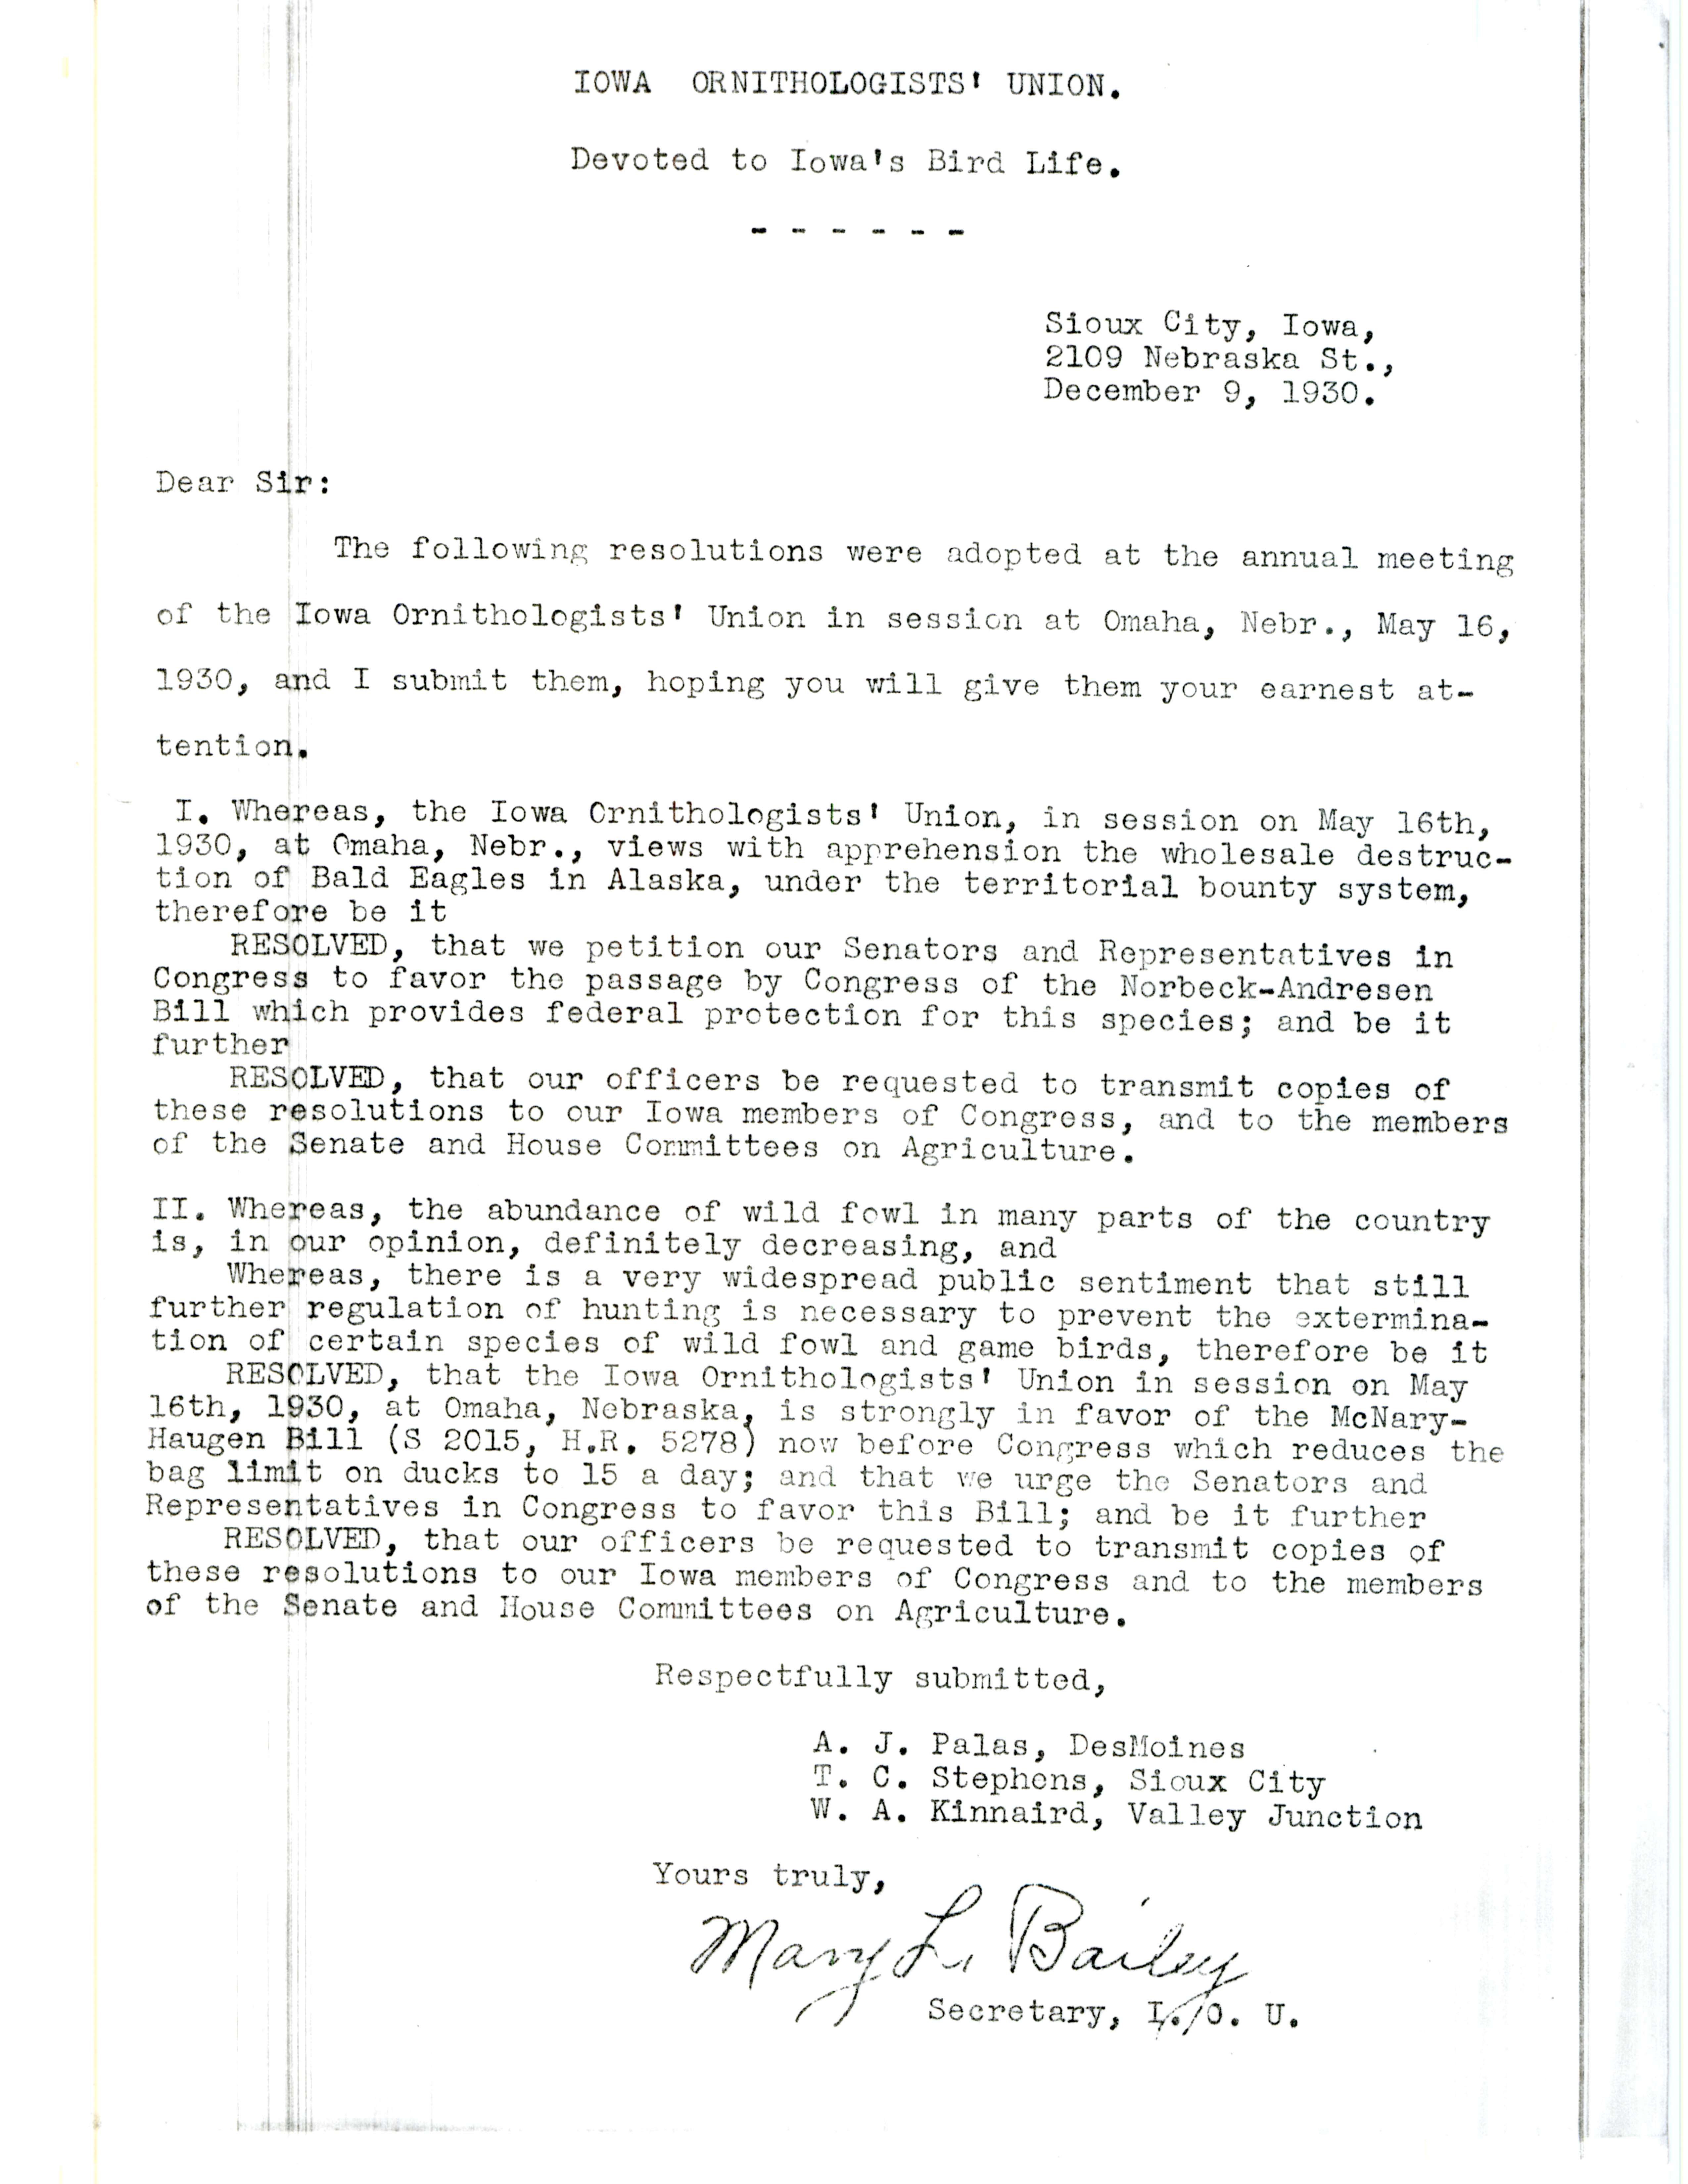 Letter to members of the Iowa Ornithologists' Union regarding resolutions adopted at the annual meeting, December 9, 1930